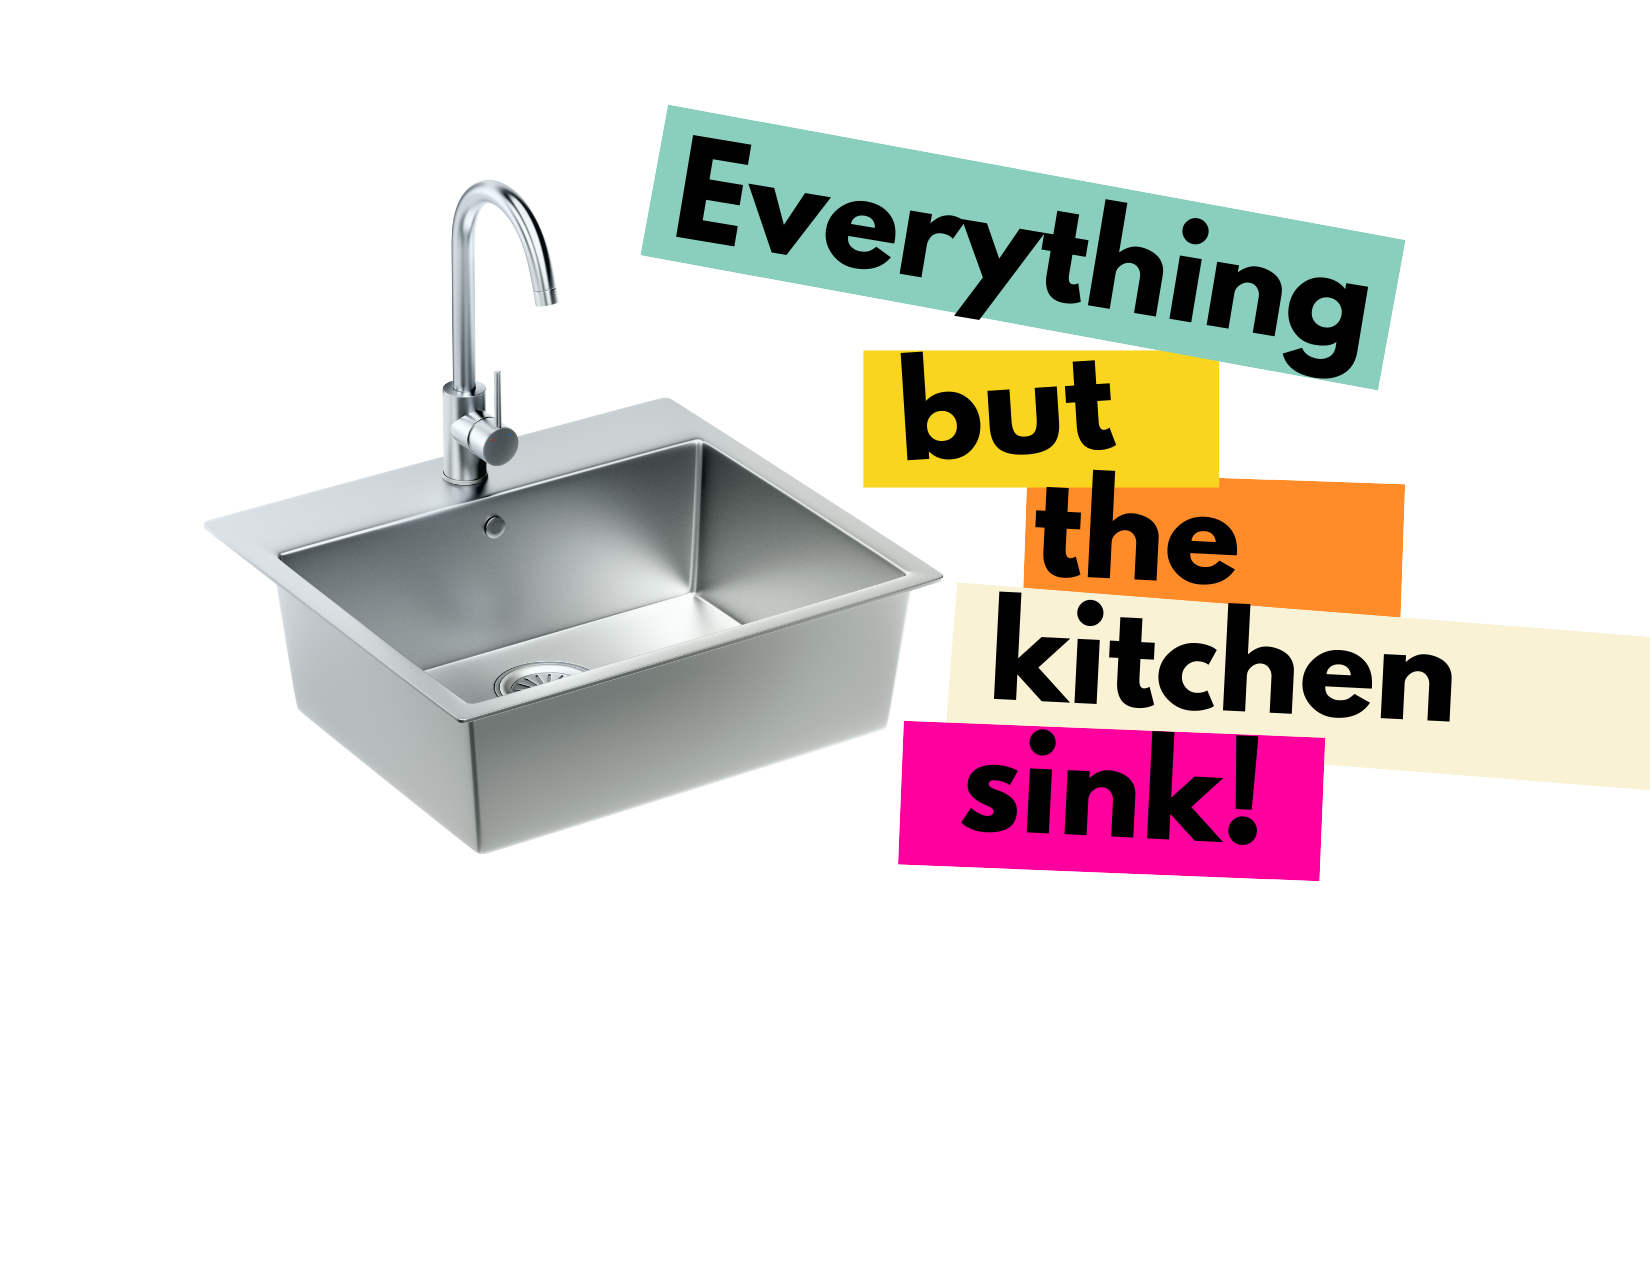 kitchen sink modpack meaning